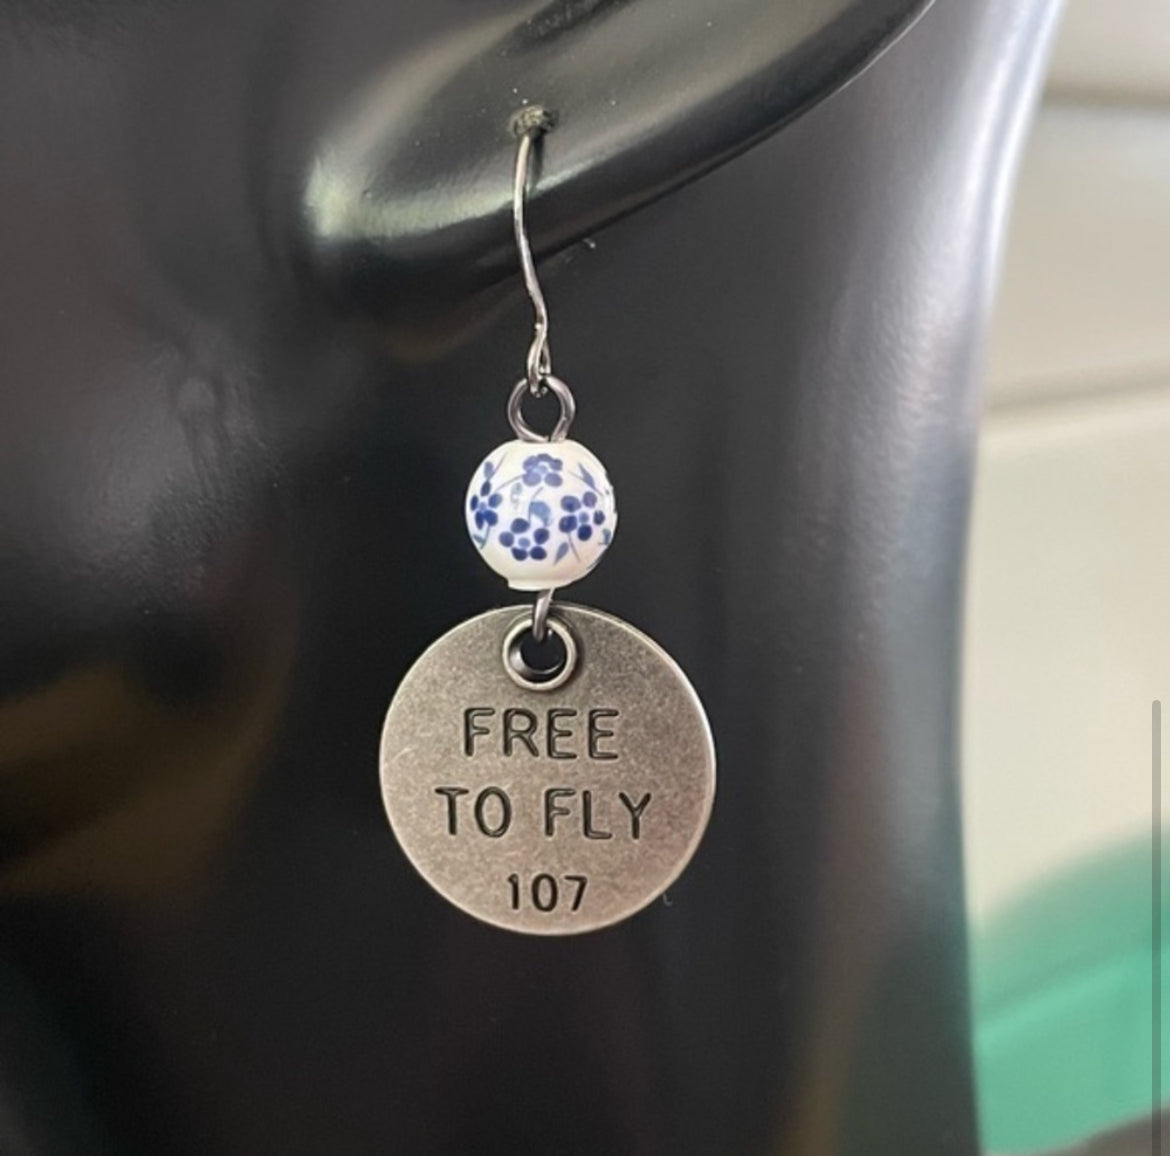 Handmade Blue White Ceramic Bead Earrings Free To Fly See World Stamped Metal Asymmetric Positive Inspiration Motivational